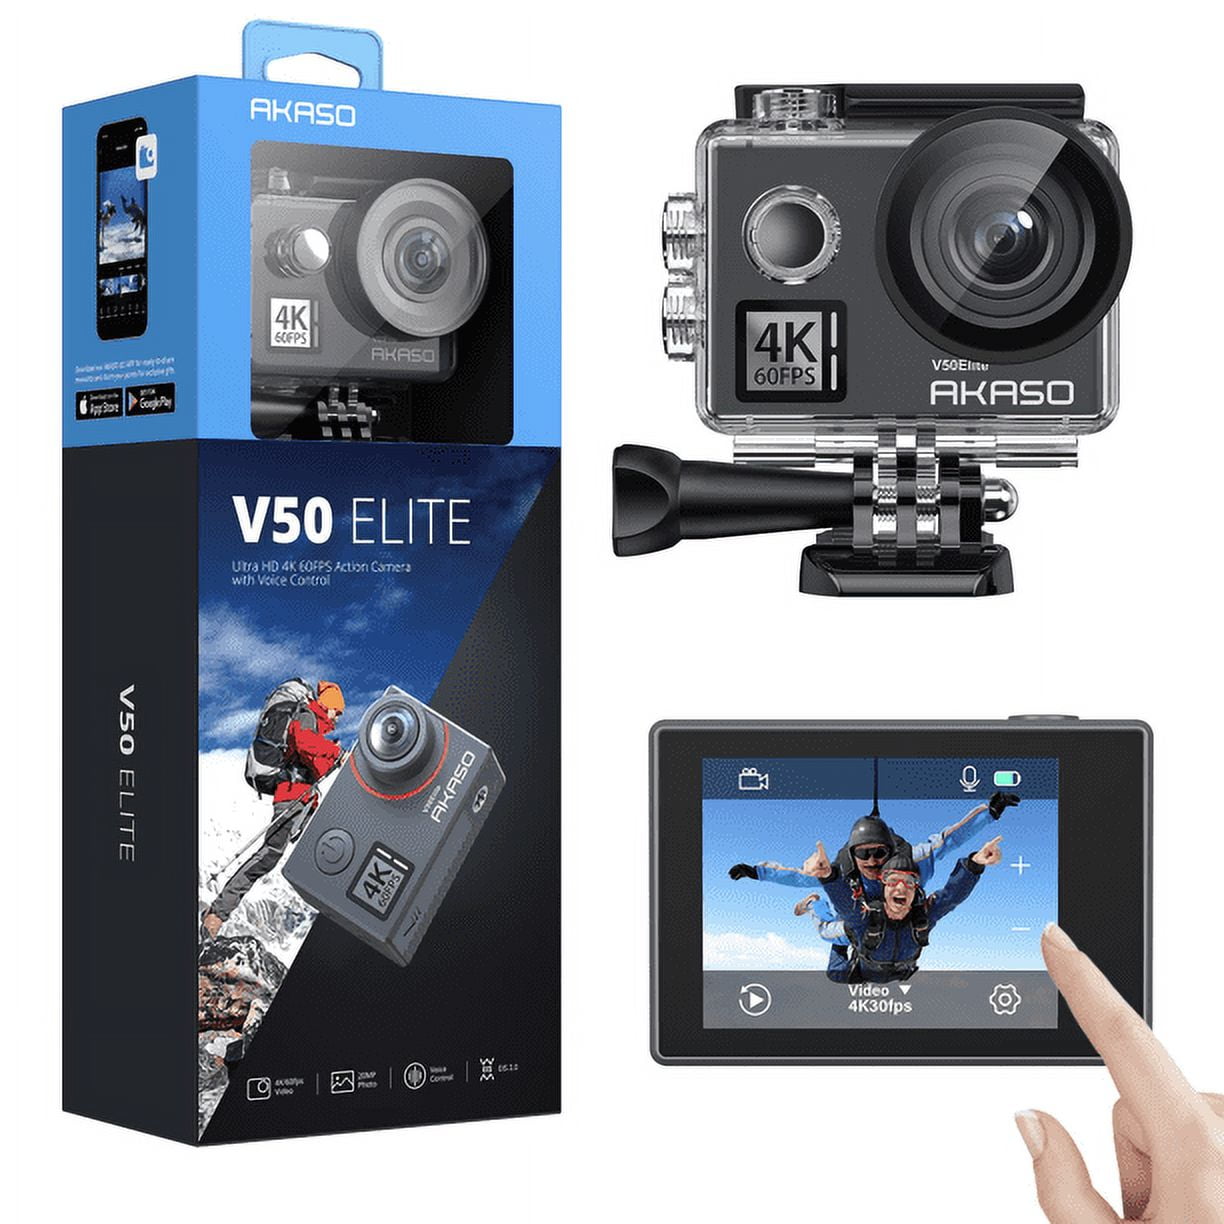 Gear Pro Sports Action Camera - HD 1080P Mini Camcorder w/ 12 MP Cam, 2.4  Touch Screen USB SD Card HDMI, Battery - Waterproof Case, USB Cable